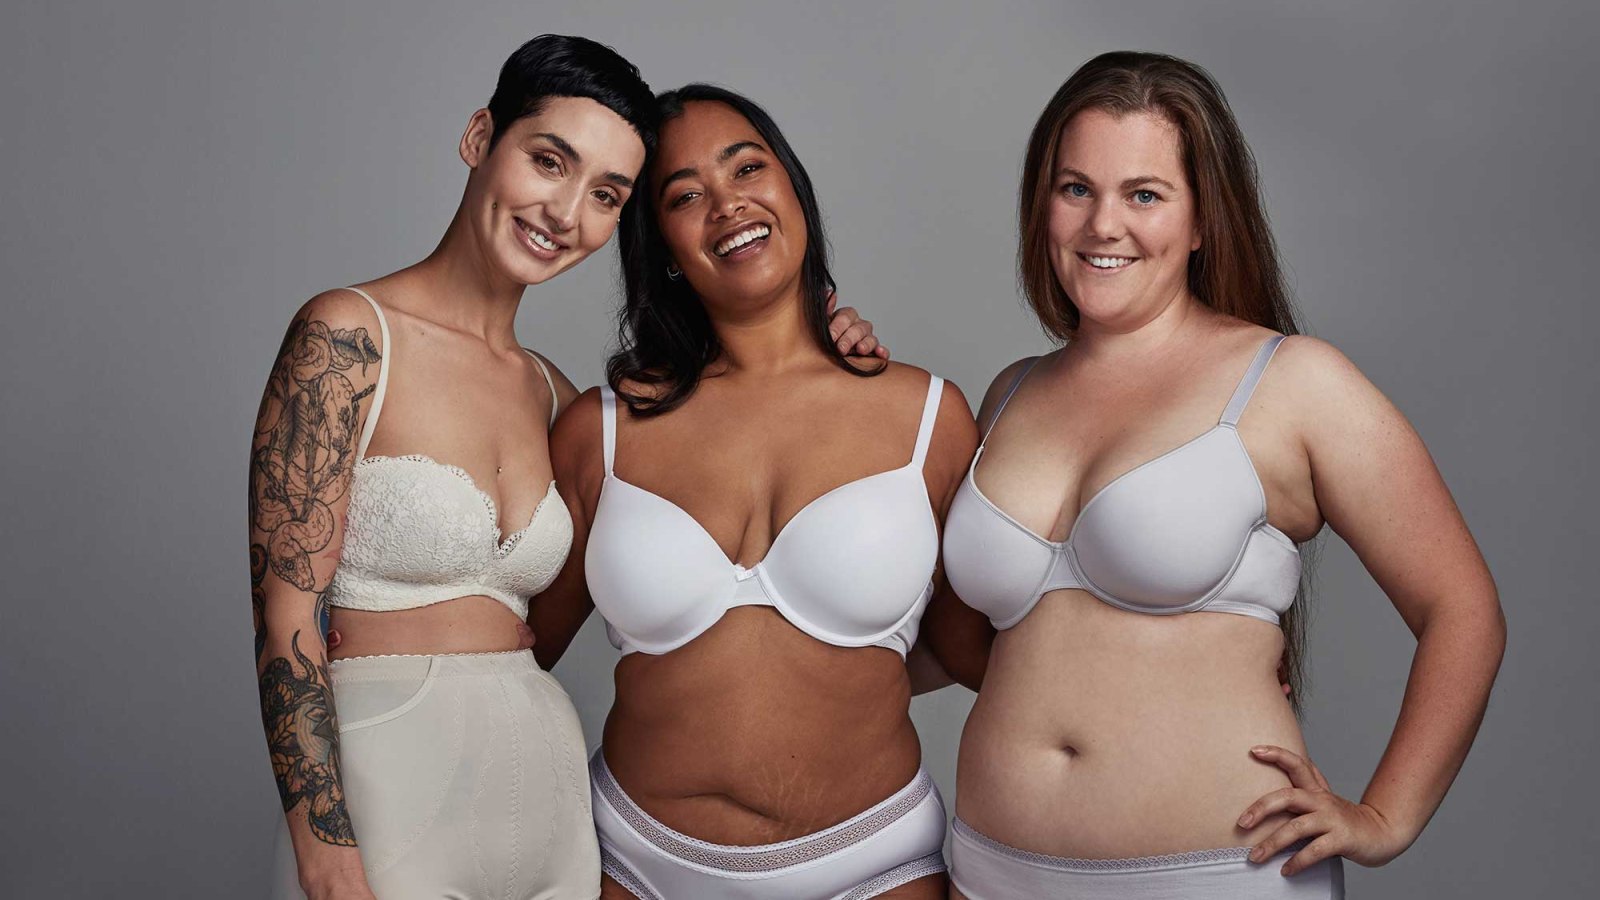 Inclusive Shapewear Collections : inclusive shapewear collection